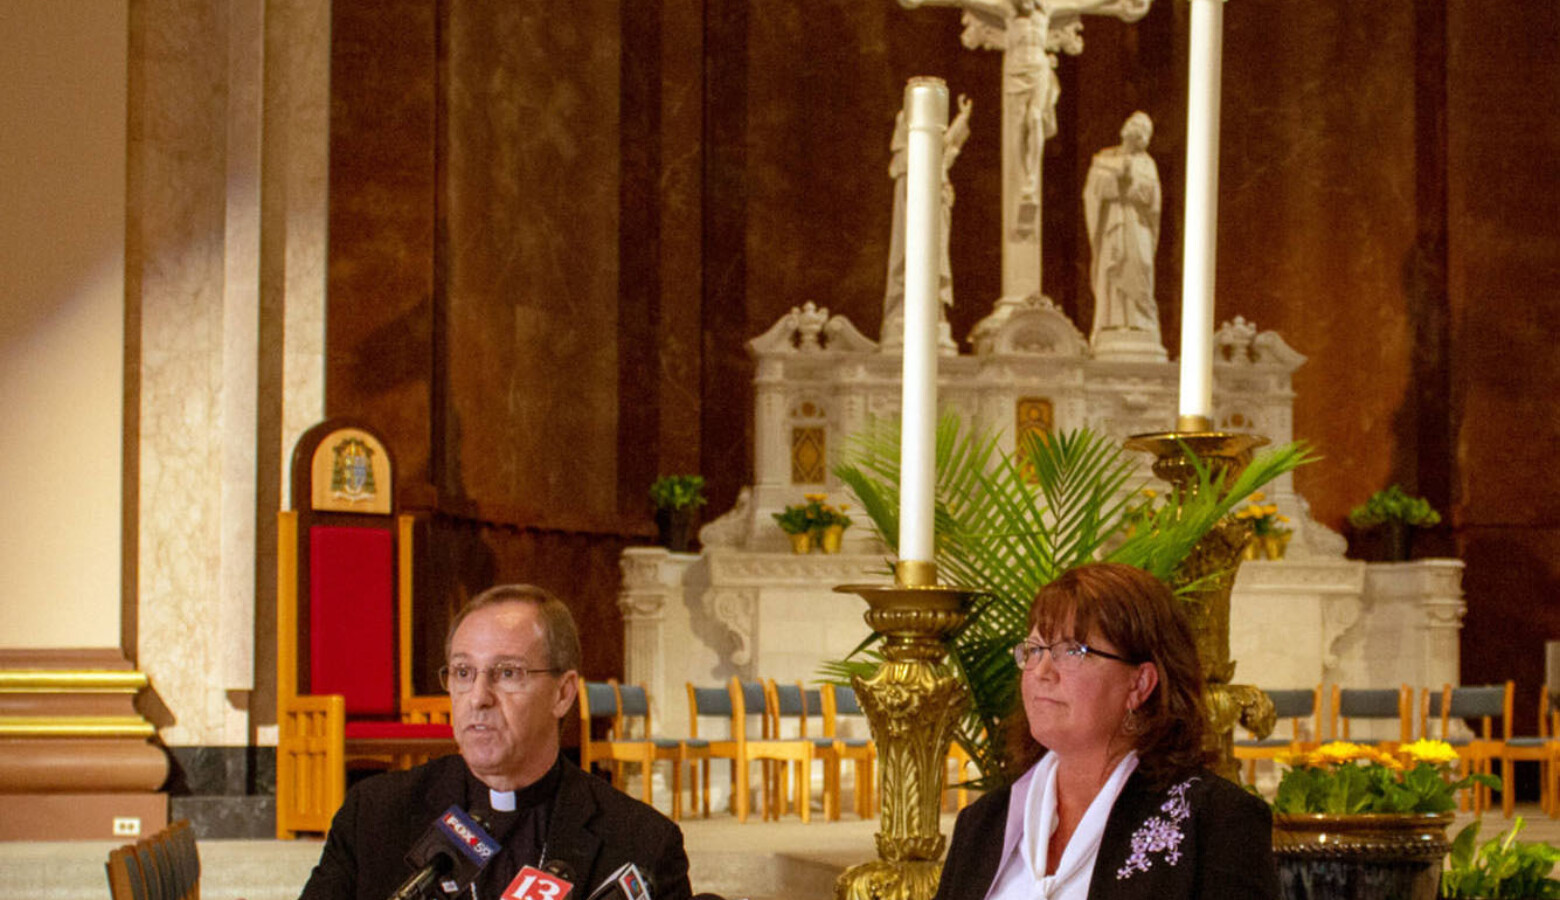 Archbishop Charles Thompson and Superintendent of Catholic Schools Gina Fleming defend the Archdiocese's policy on LGBTQ teachers at Catholics schools last year. (Evan Robbins/WFYI News)